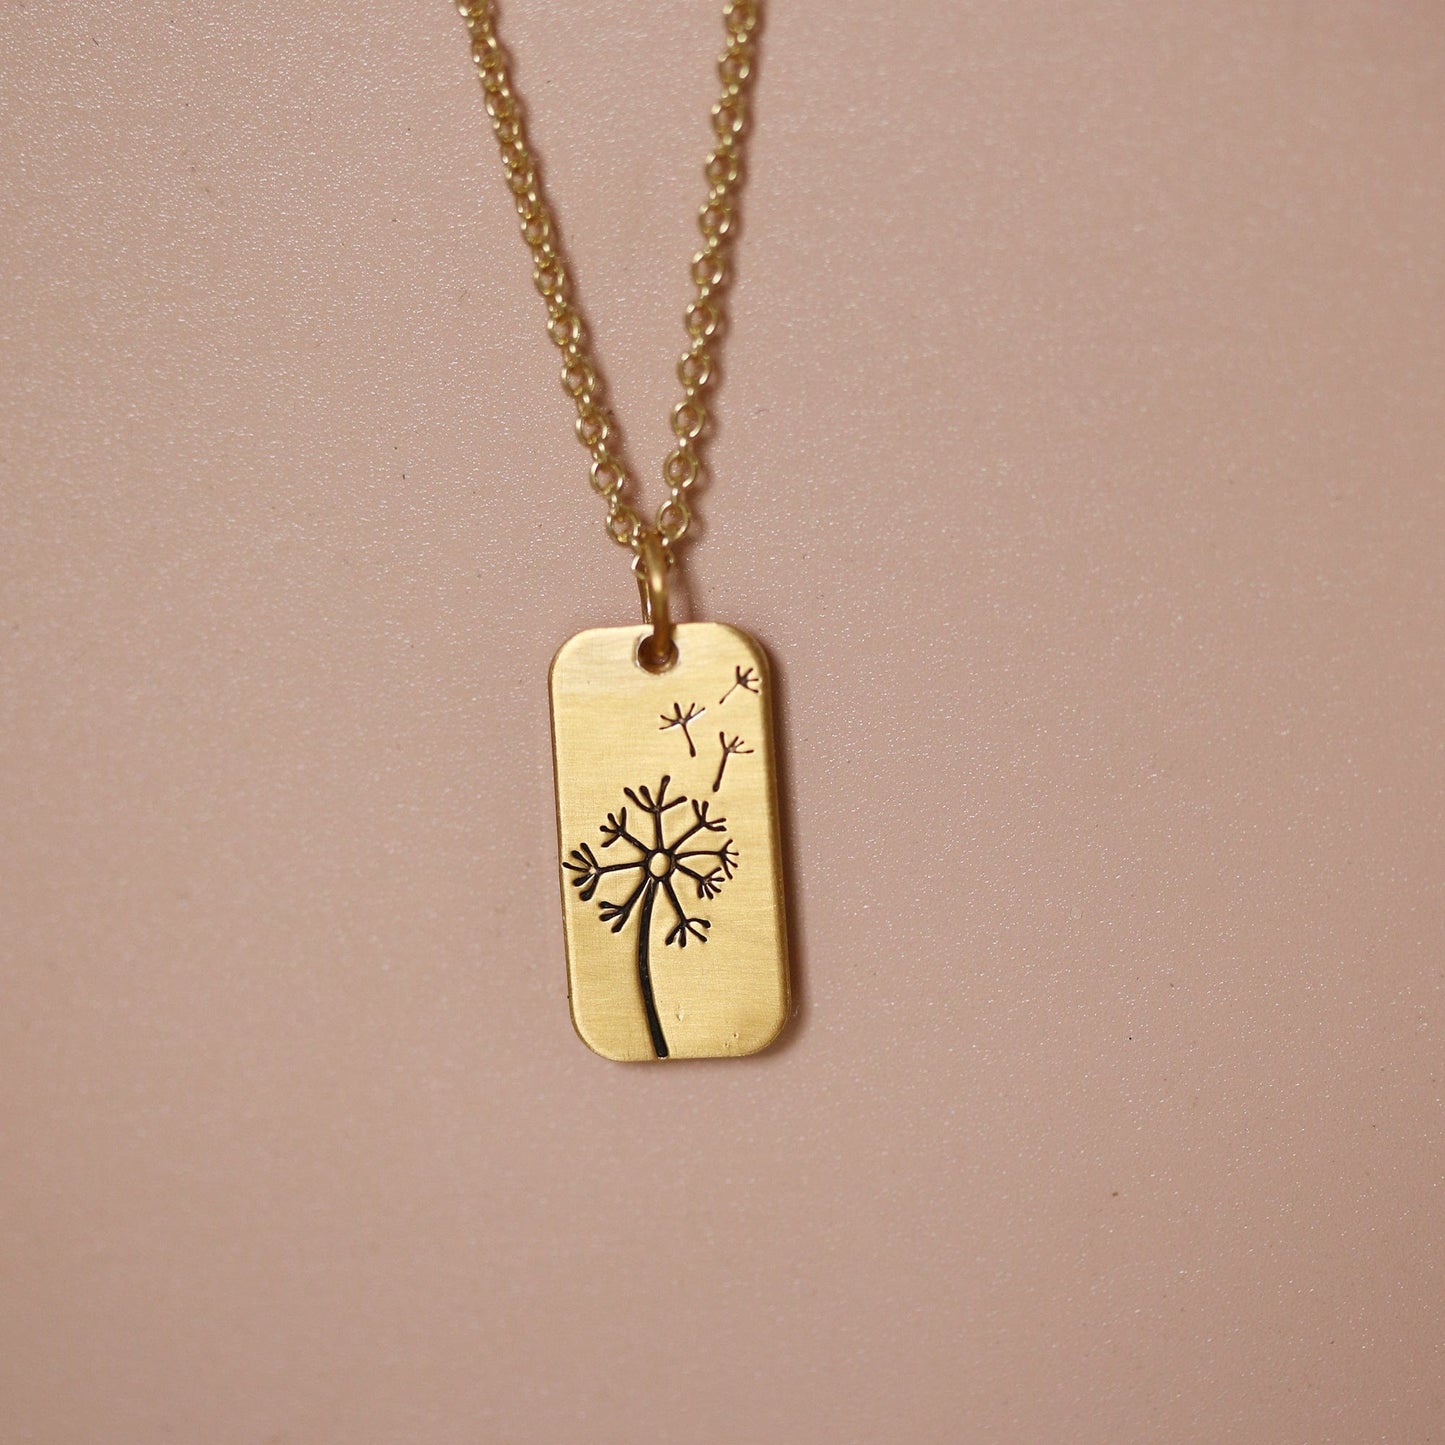 NKL-GPL Dandelion Petite Tag Necklace - Wishing Necklace Gold Plated